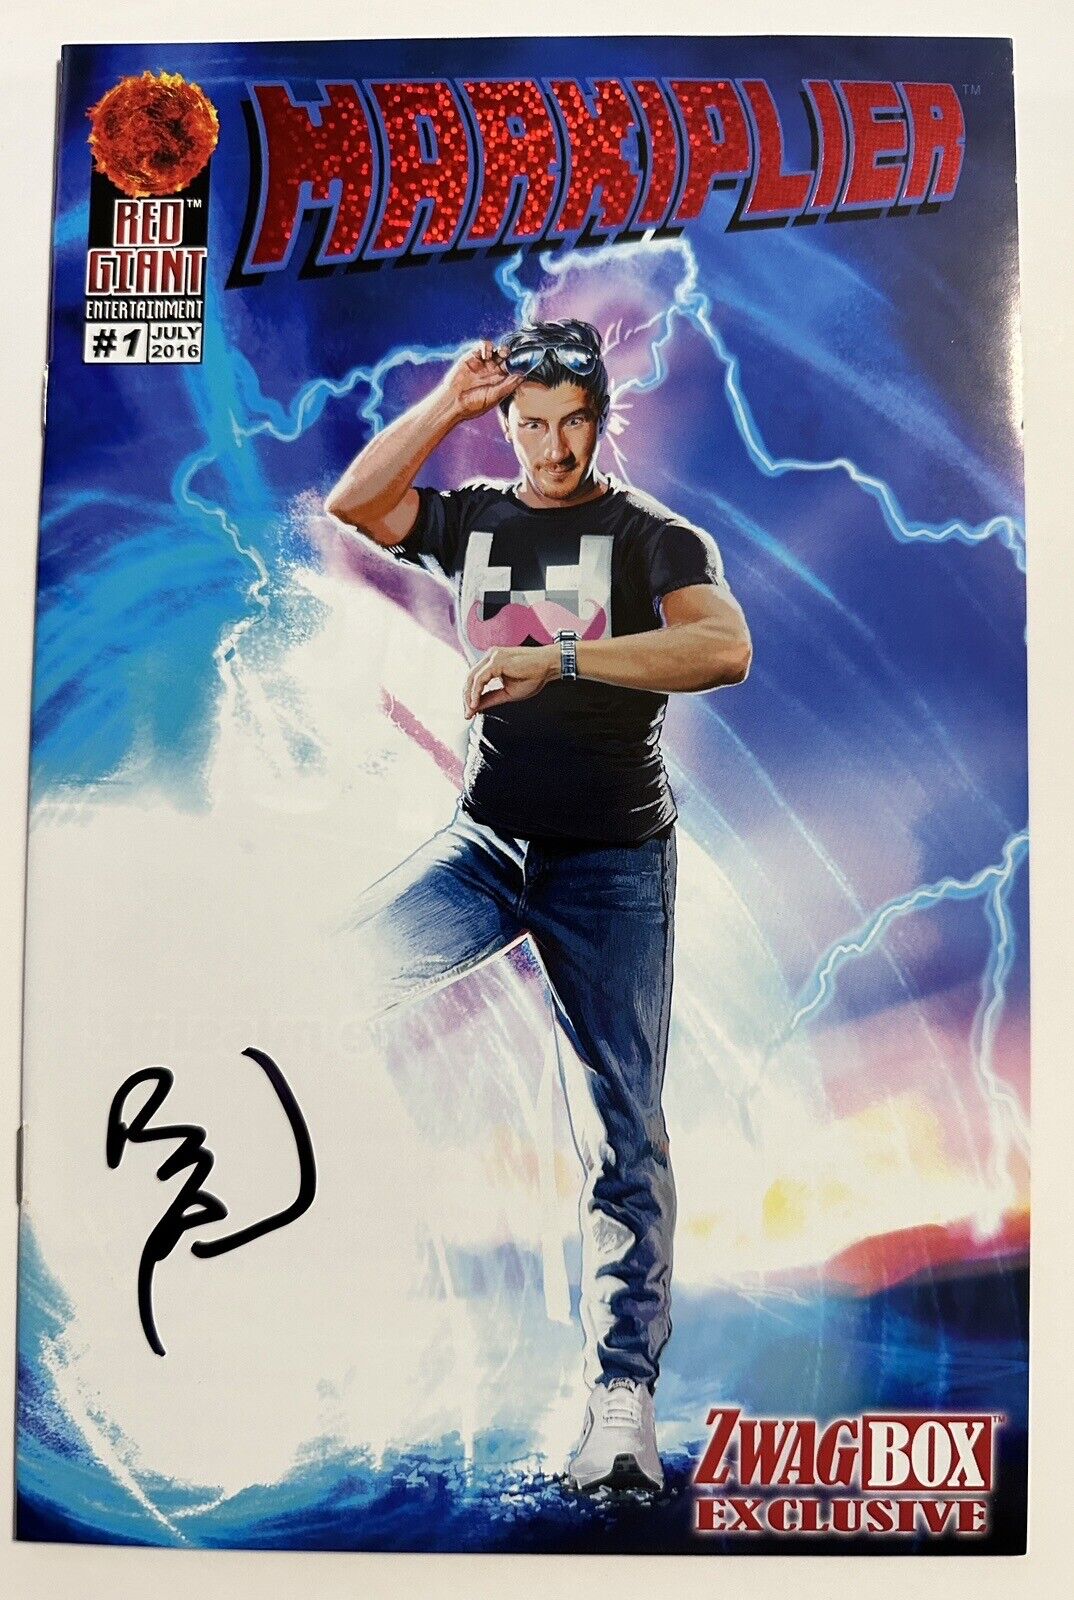 Markiplier #1 2017 Red Giant Zwag Box Exclusive Comic Signed by Benny Powell